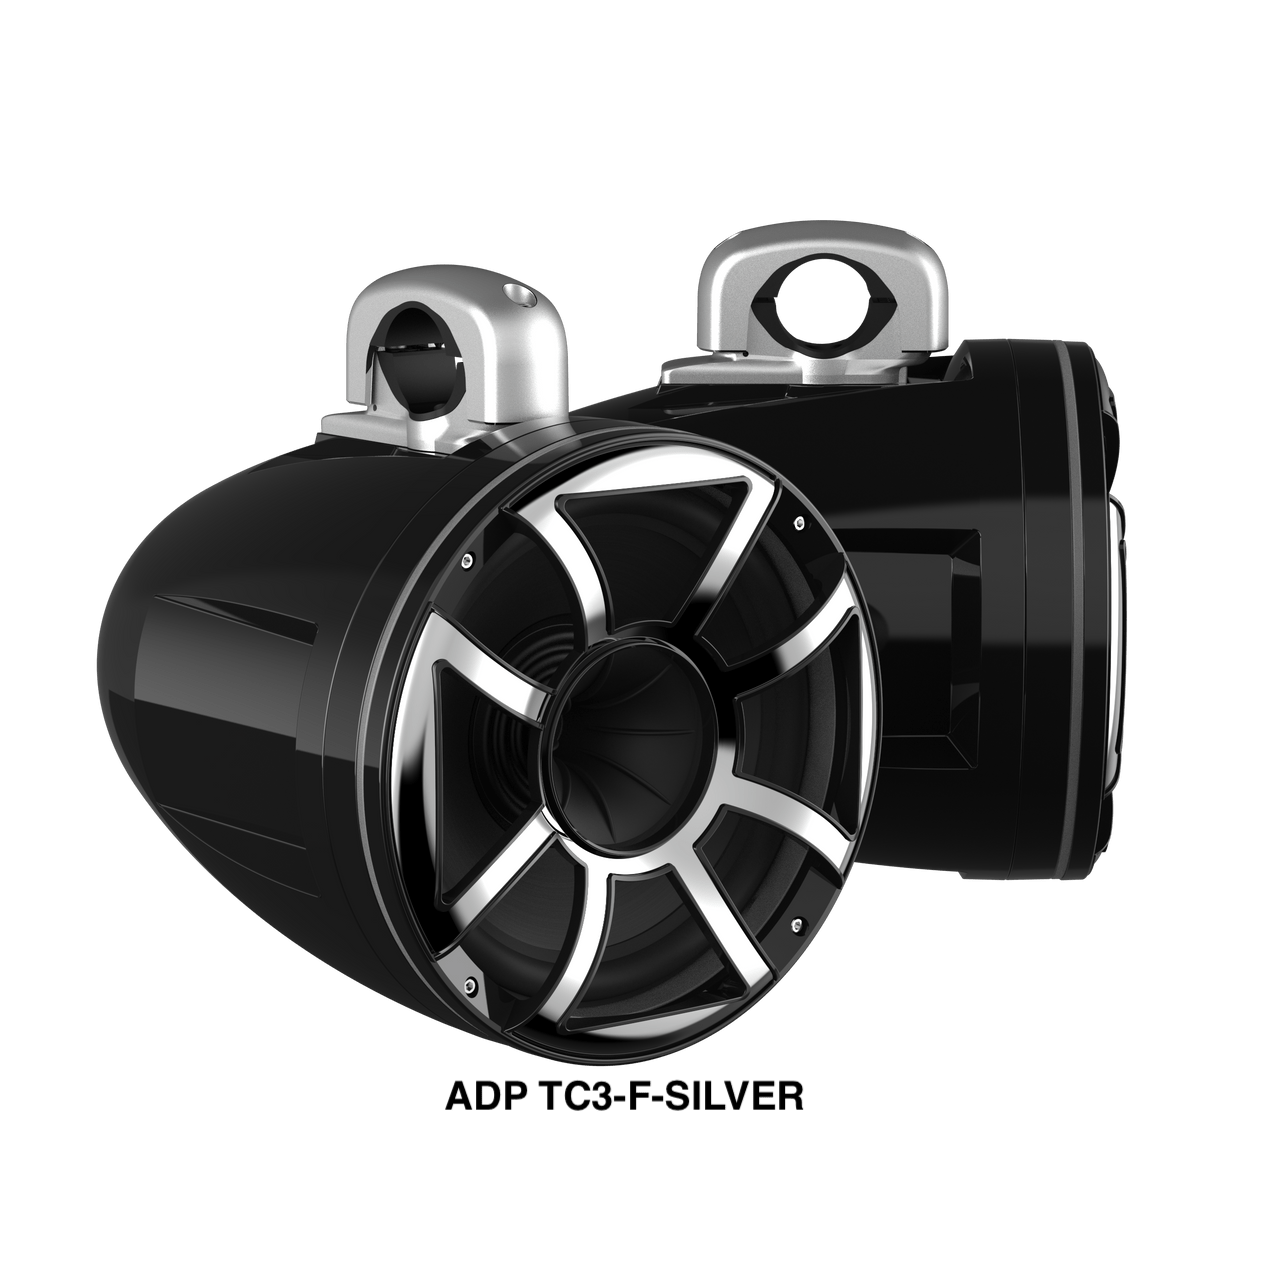 Wet Sounds Rev12 HD | High-Output 12" Wakeboard Tower Speakers